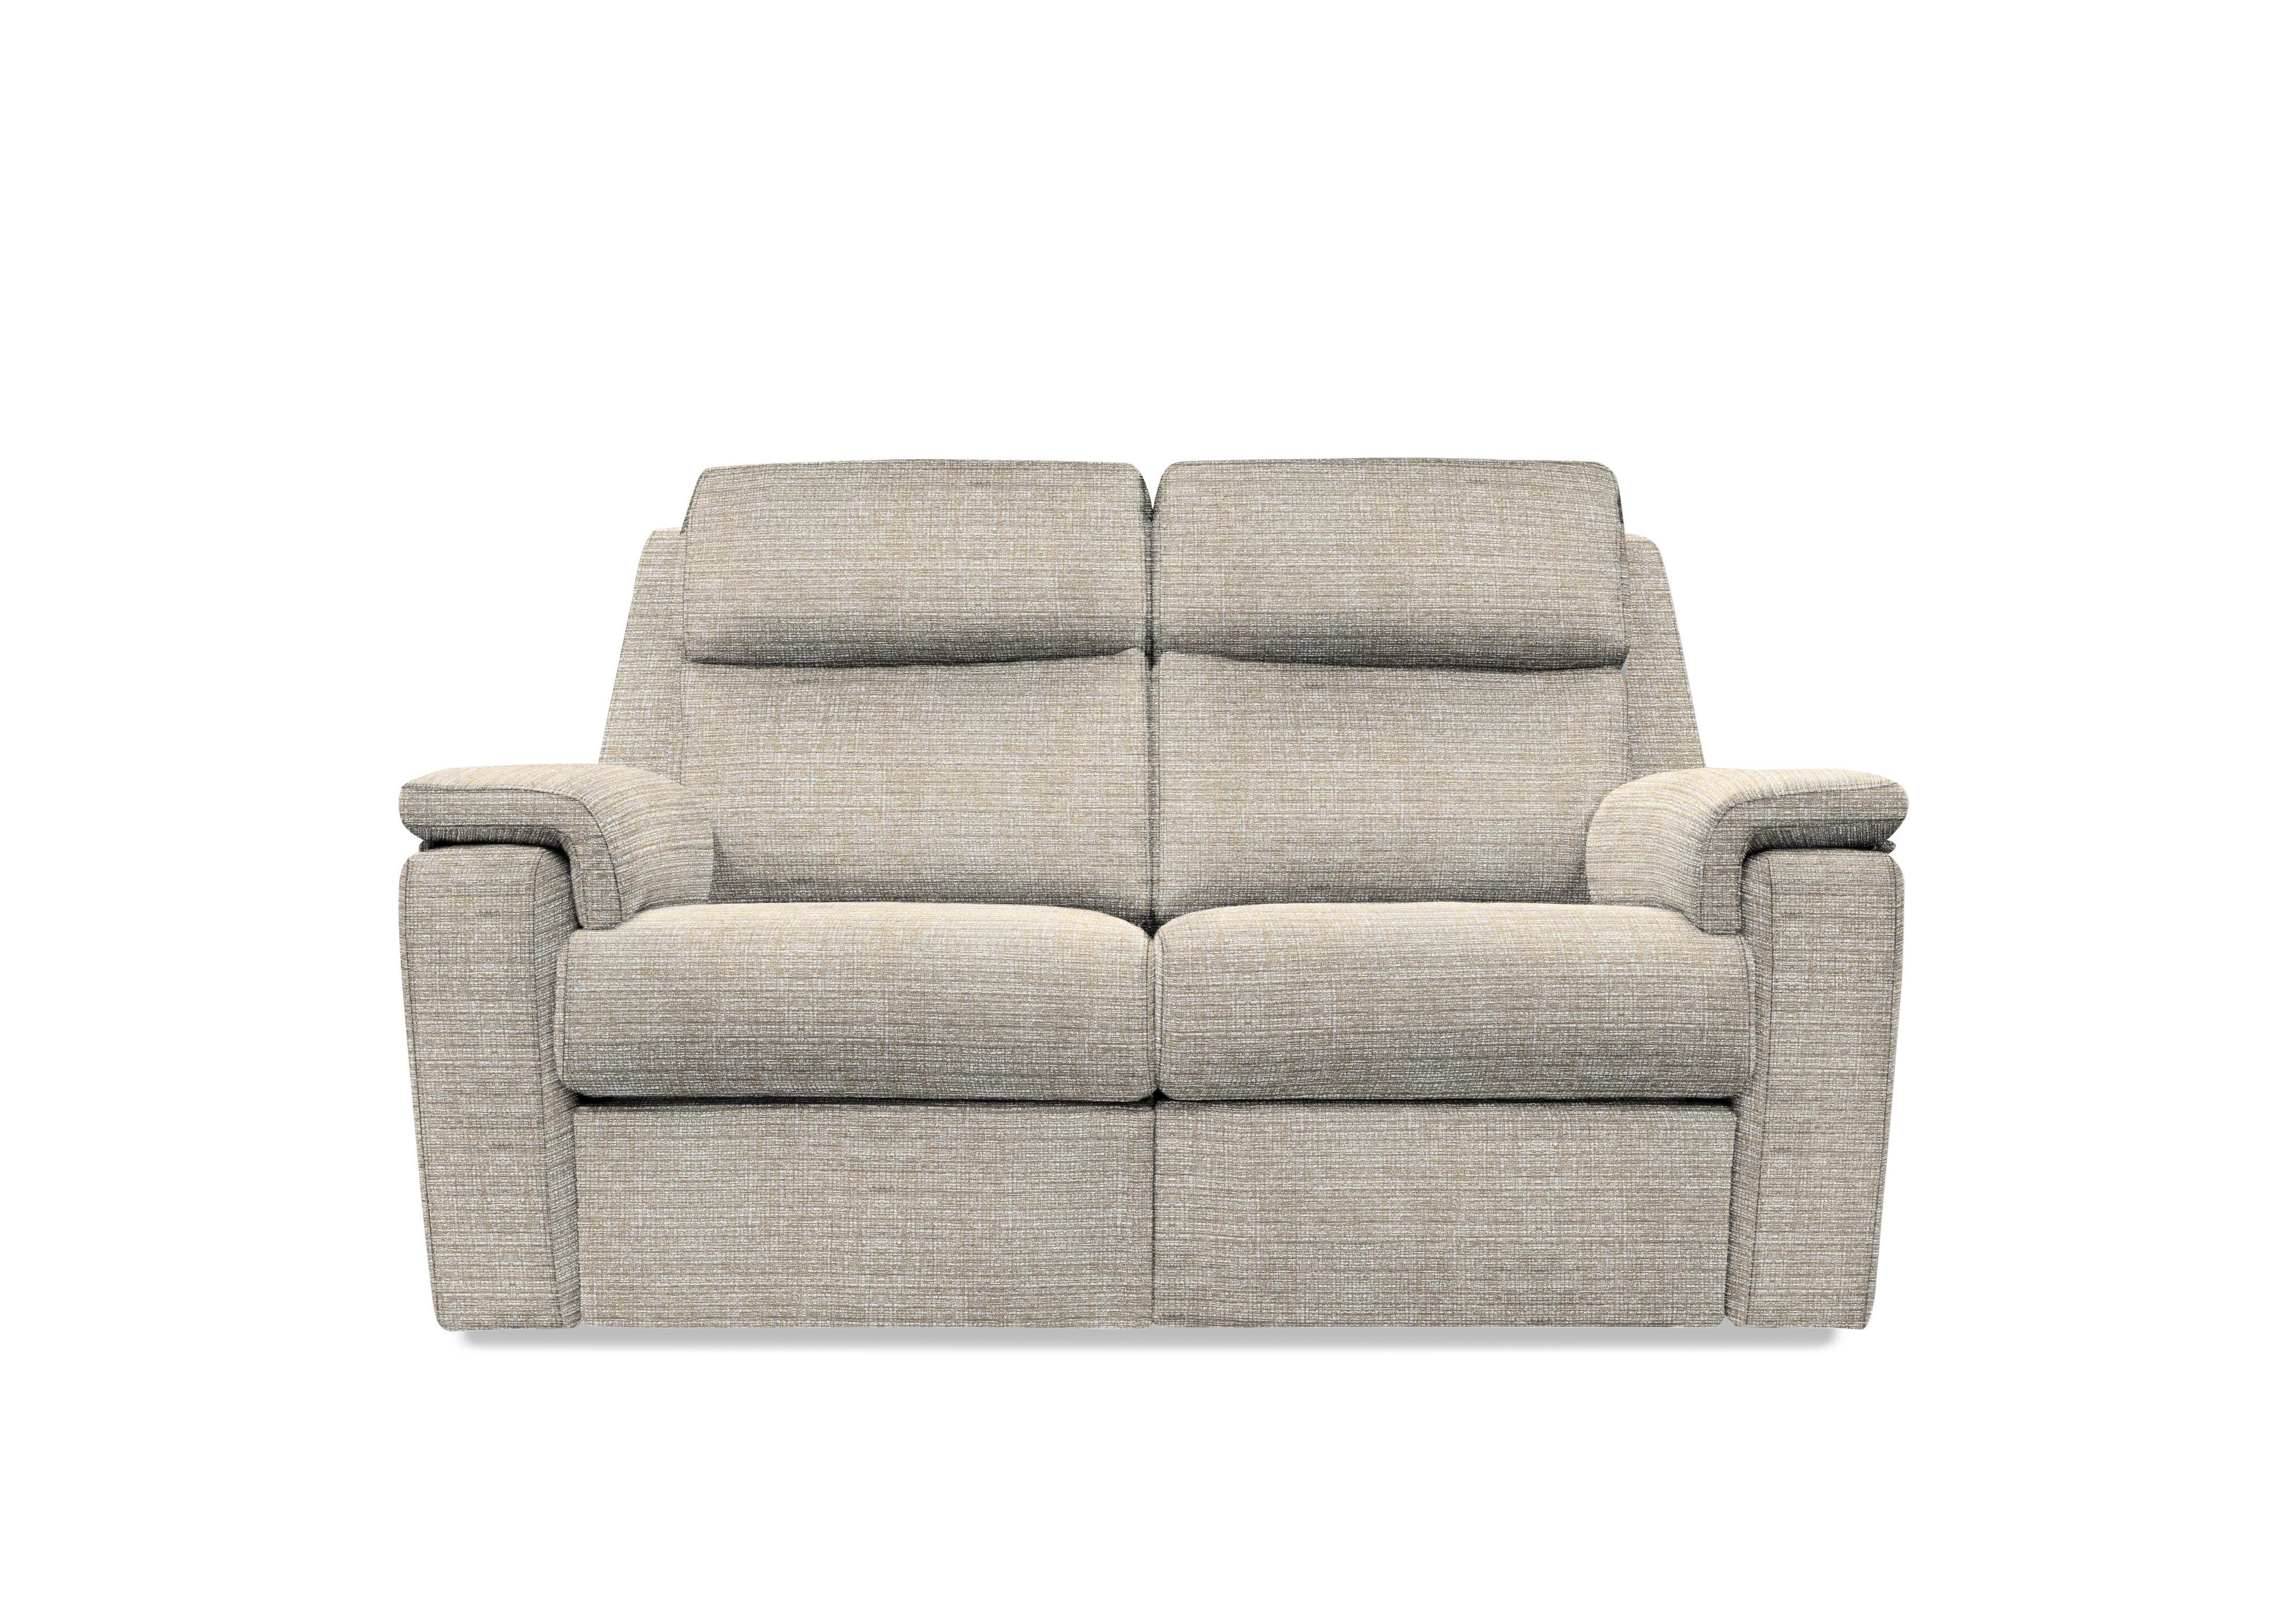 Thornbury 2 Seater Fabric Power Recliner Sofa with Power Headrests and Power Lumbar in A006 Yarn Shale on Furniture Village